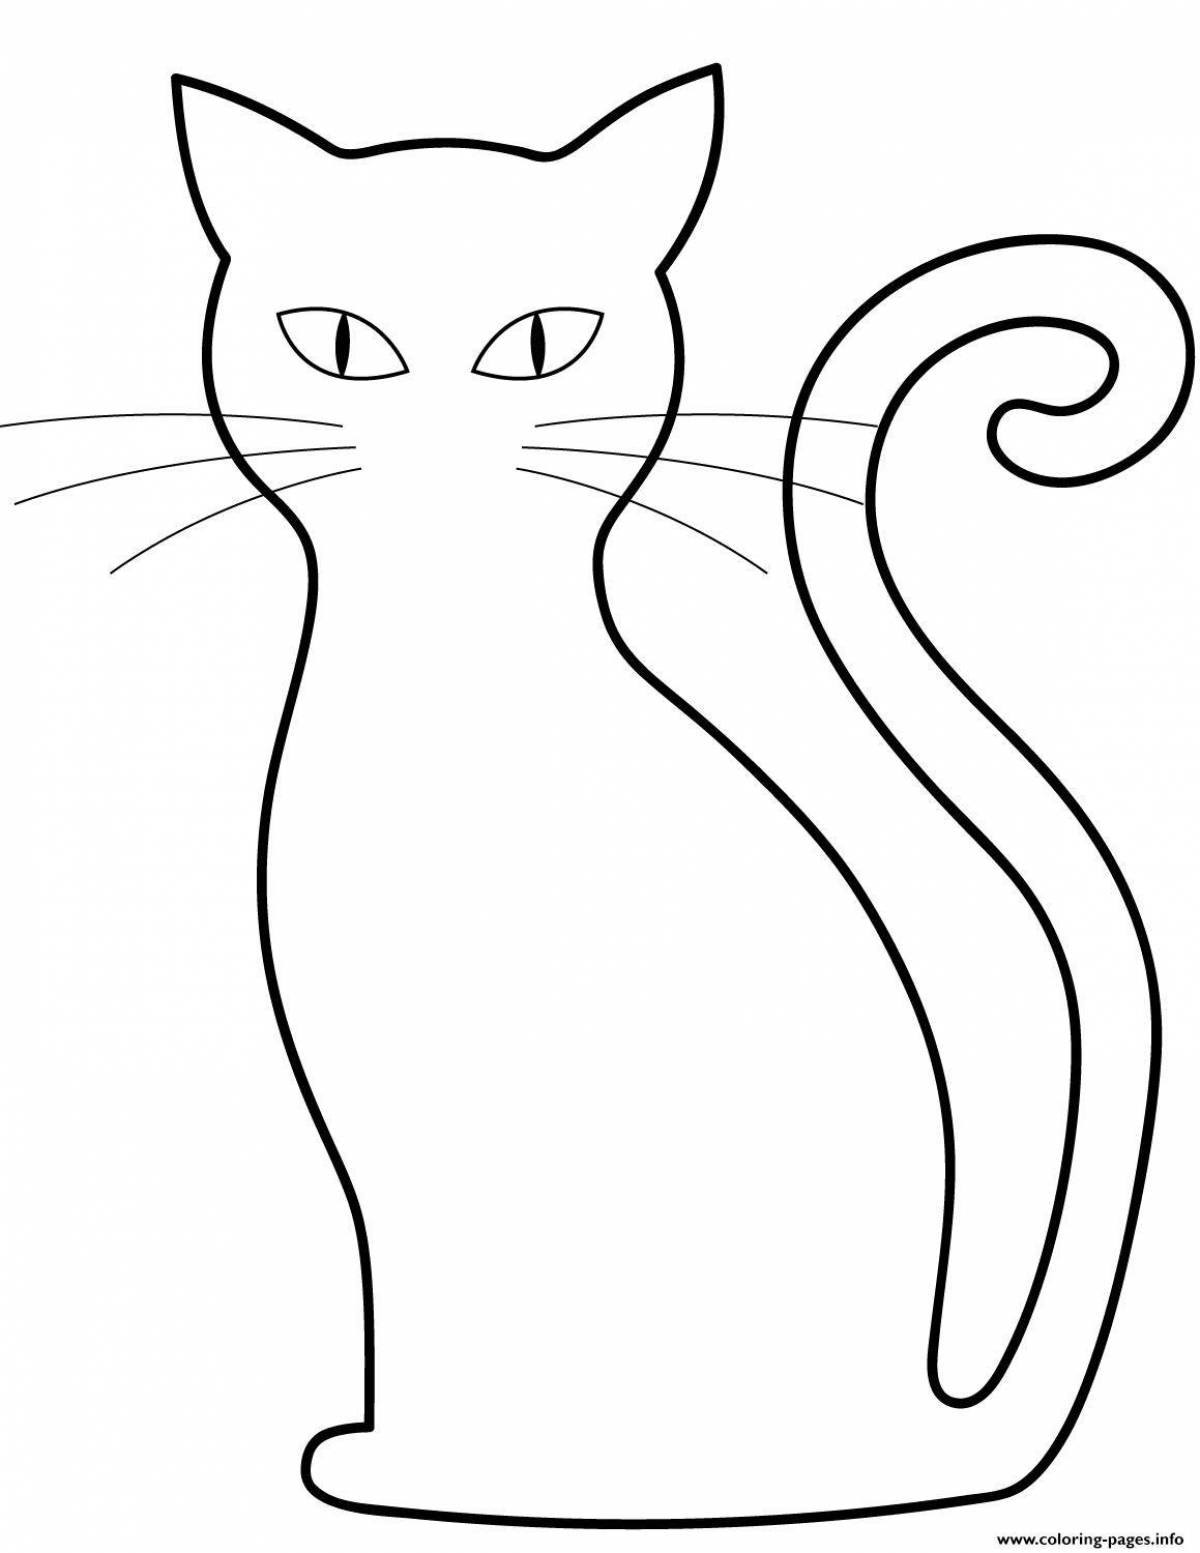 Live cat outline coloring page